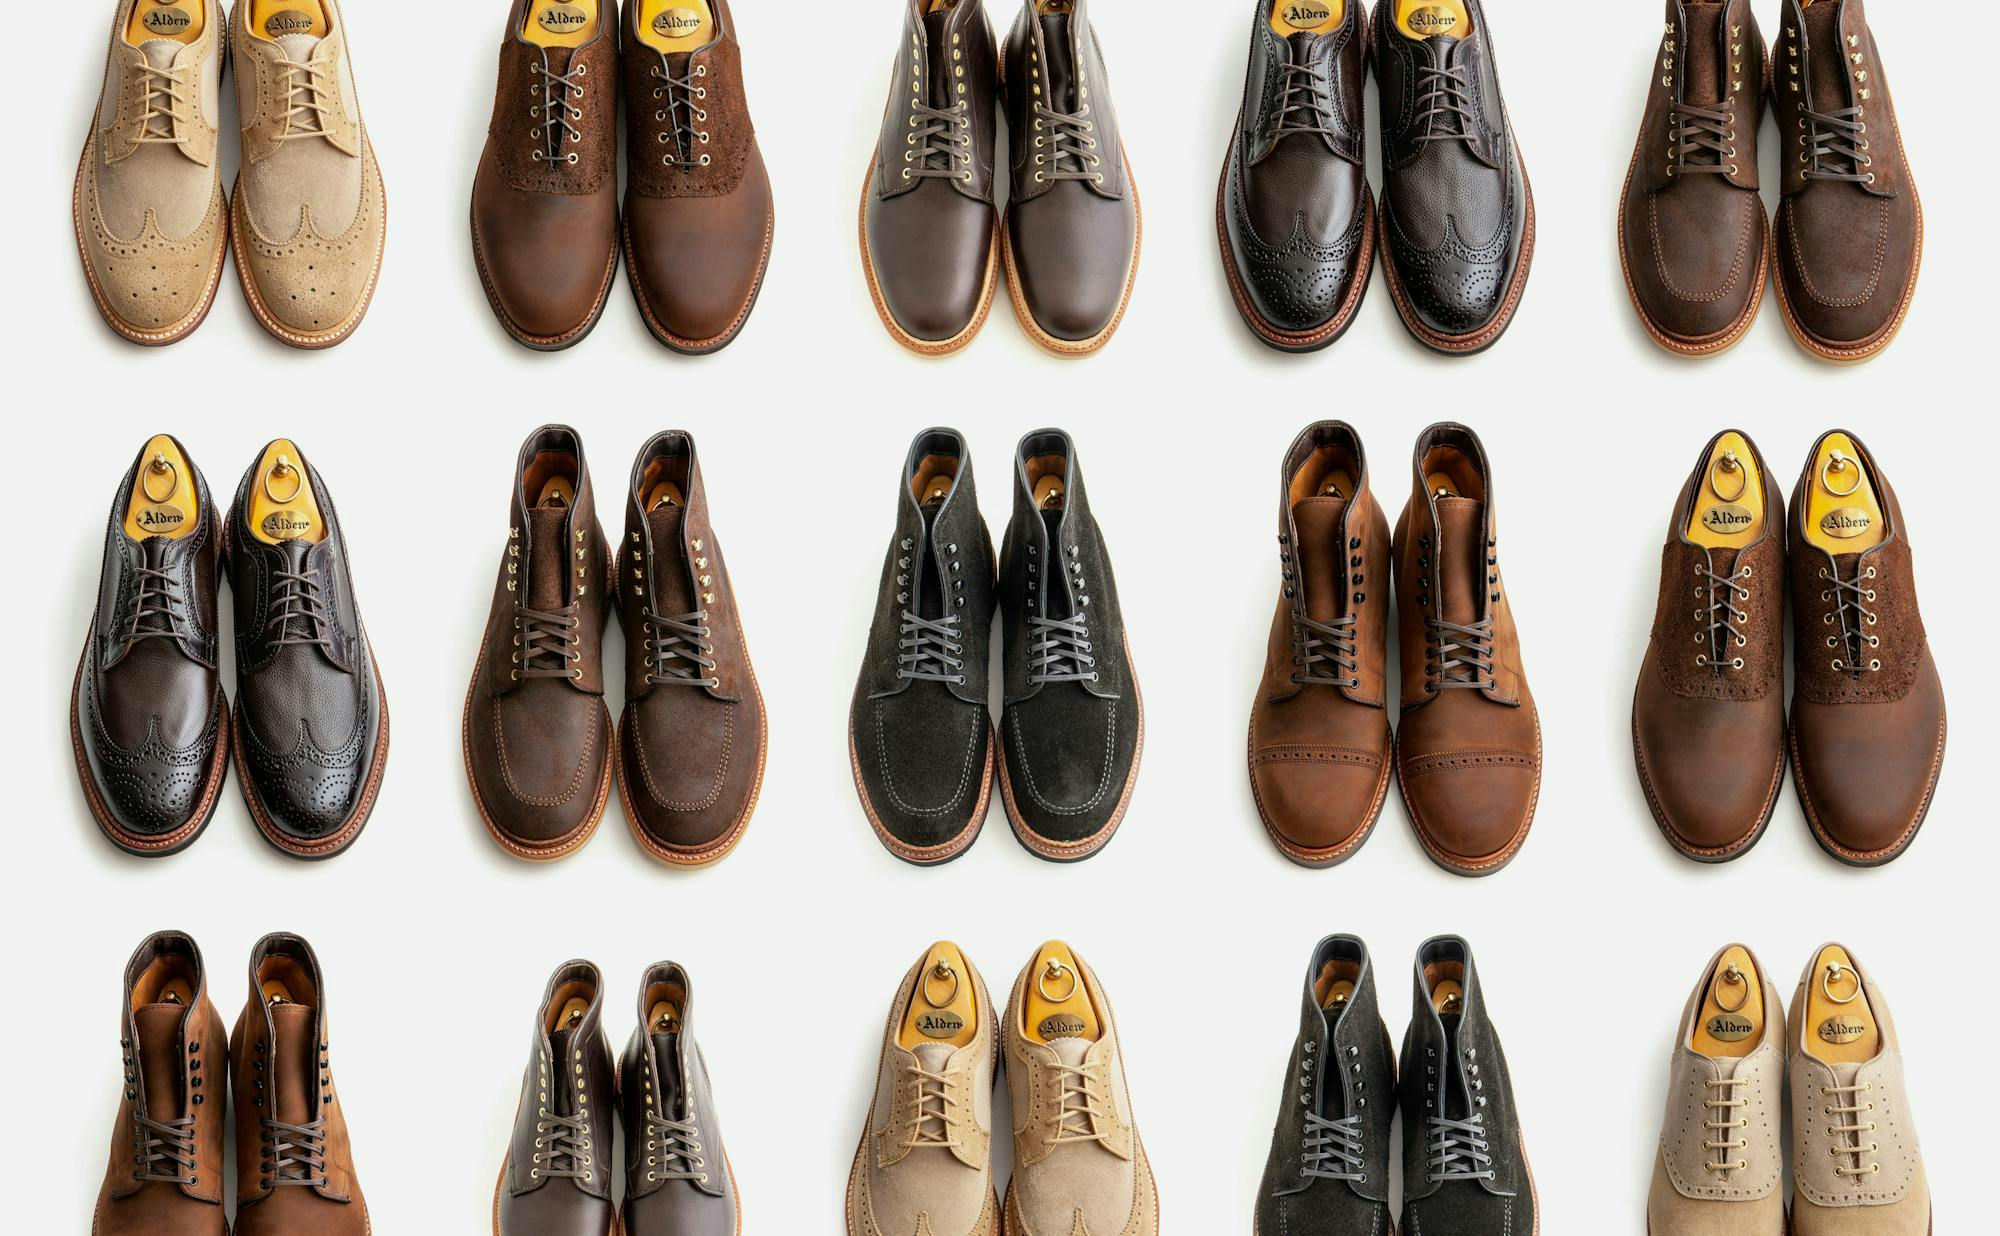 Fifteen Alden boots and shoes arranged in a grid on a light grey background.